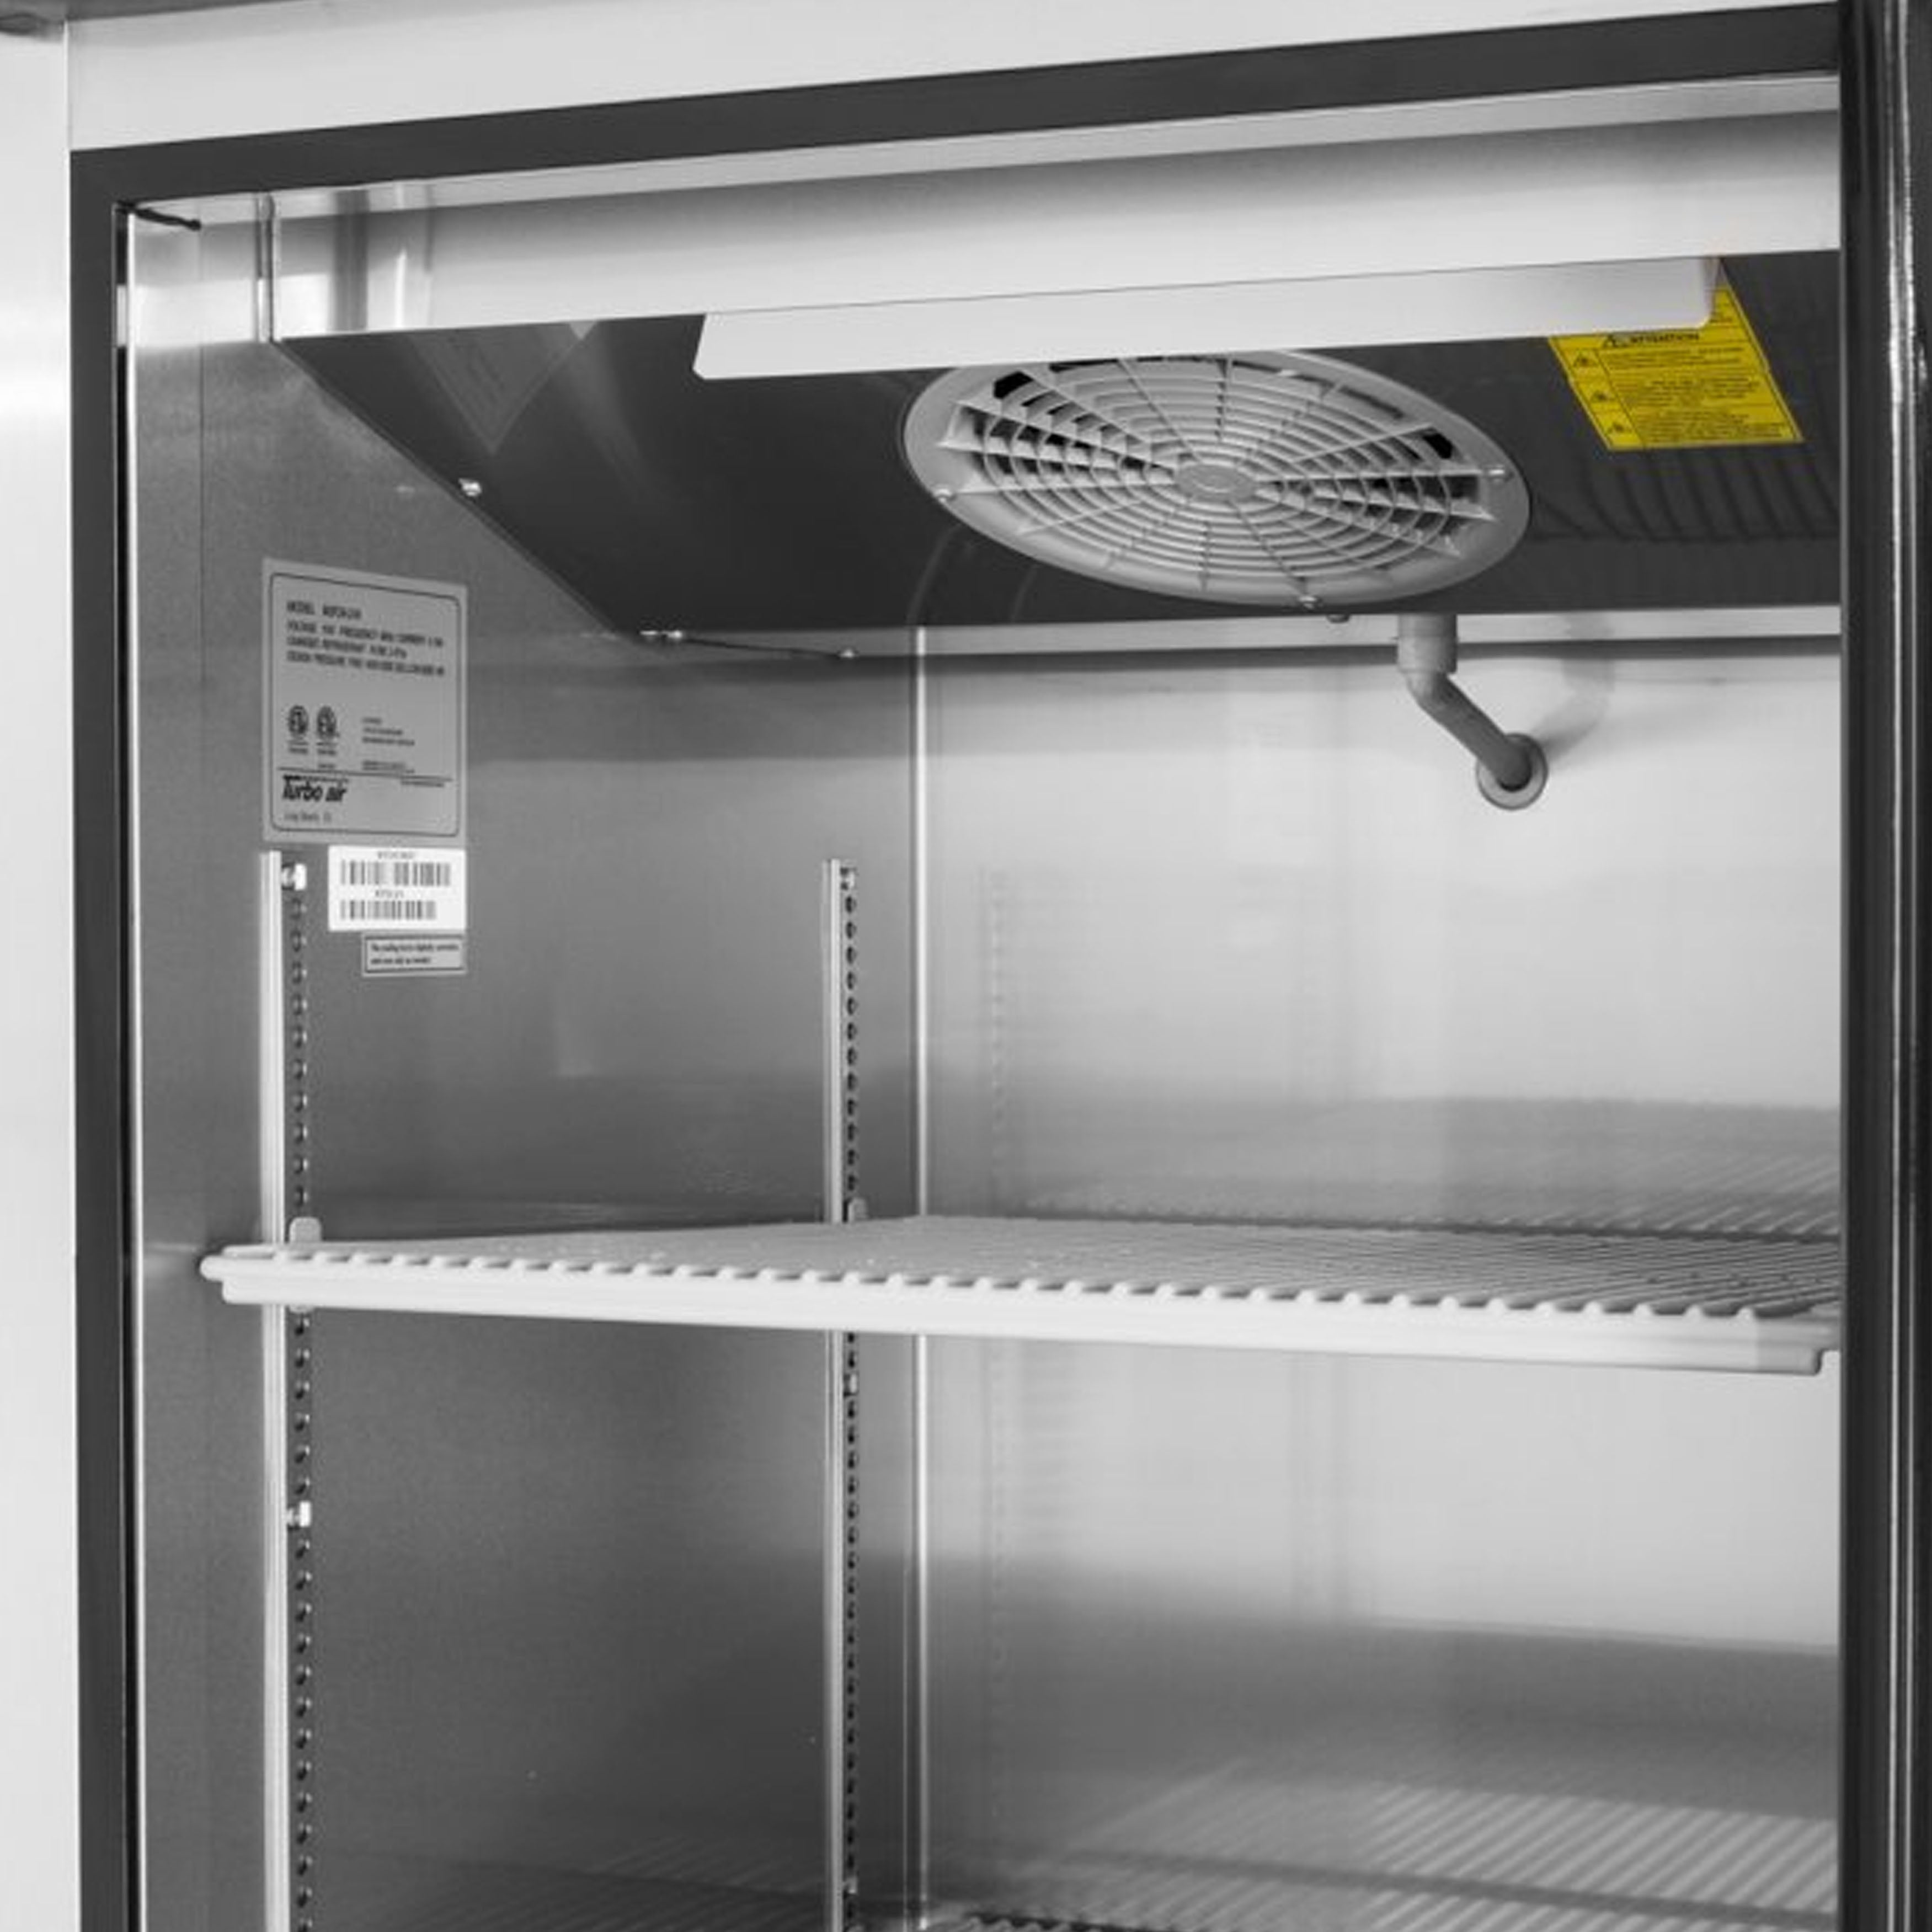 Turbo Air - M3F19-1-N, Commercial 25" Reach-in Freezer M3 Series Stainless Steel 18.7 cu. ft.